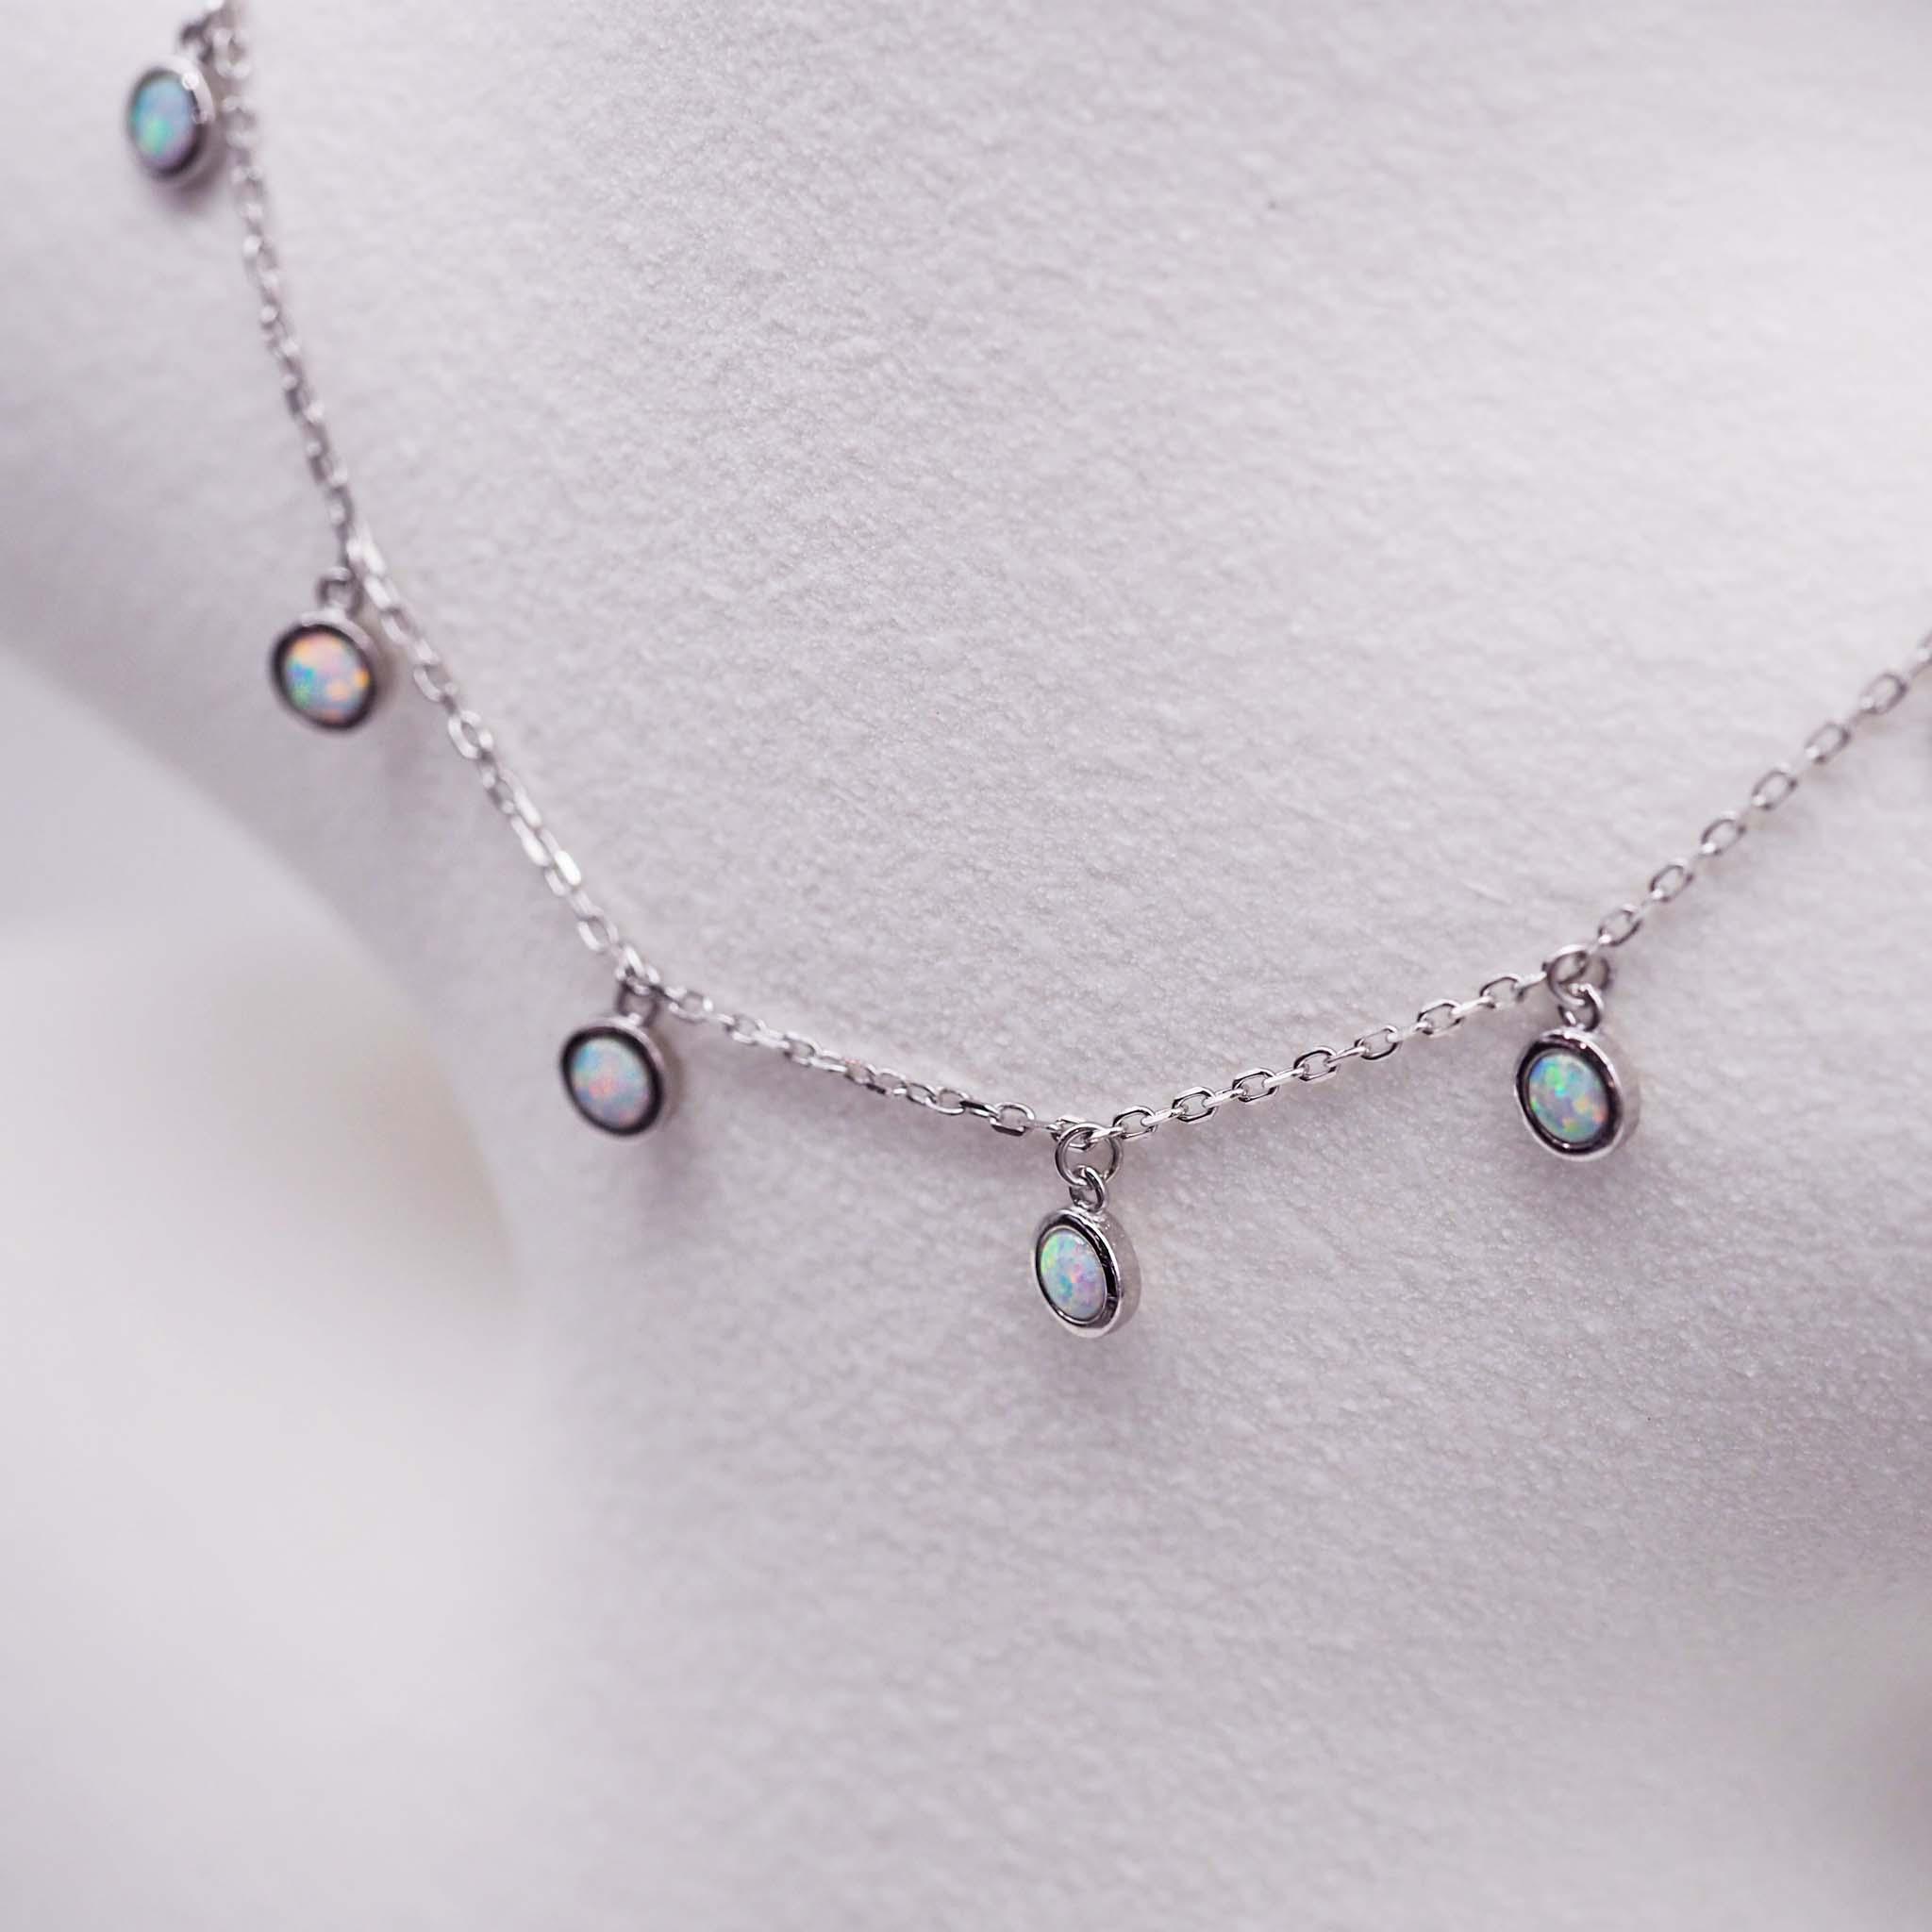 Moonlight Opal Necklace - womens jewellery by indie and harper